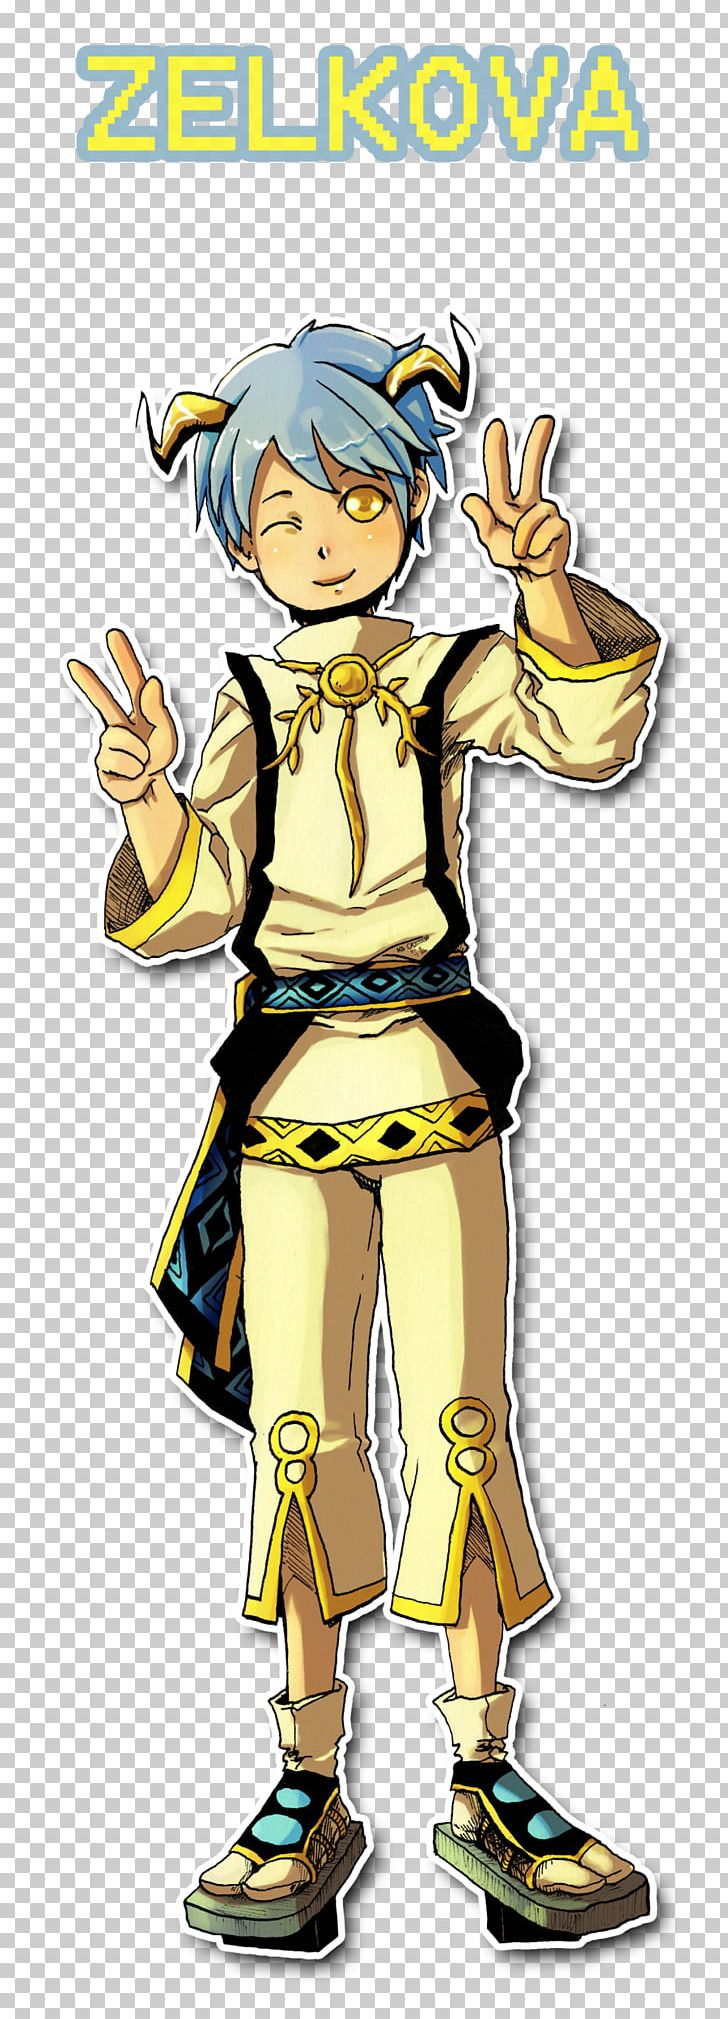 Artist Haseo Illustration PNG, Clipart, Art, Artist, Artwork, Cartoon, Character Free PNG Download